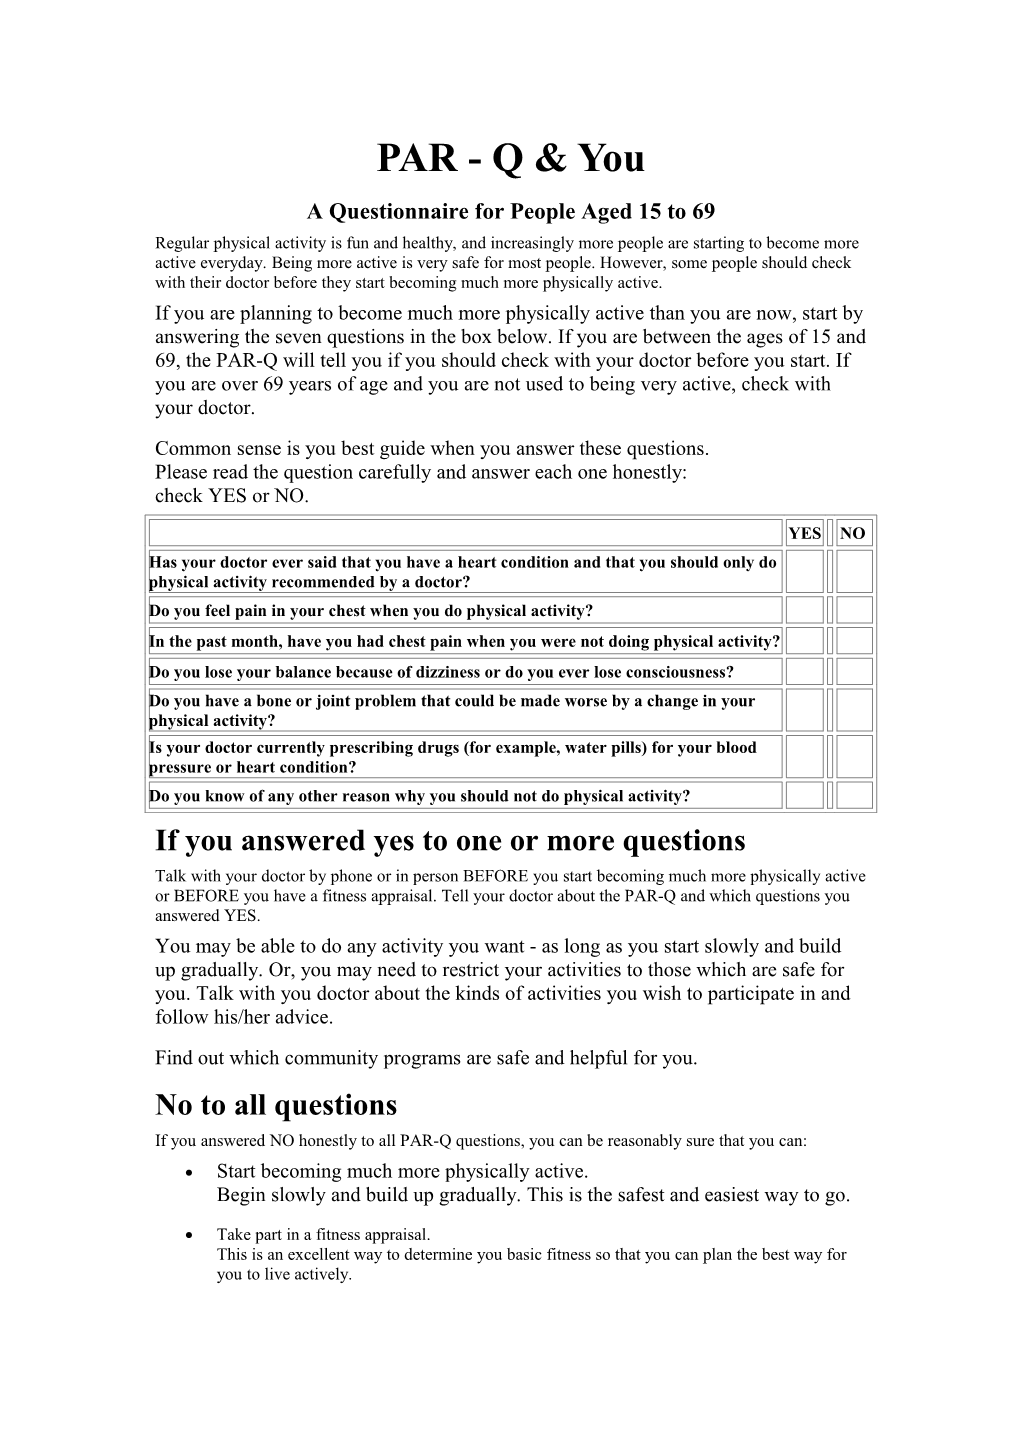 A Questionnaire for People Aged 15 to 69